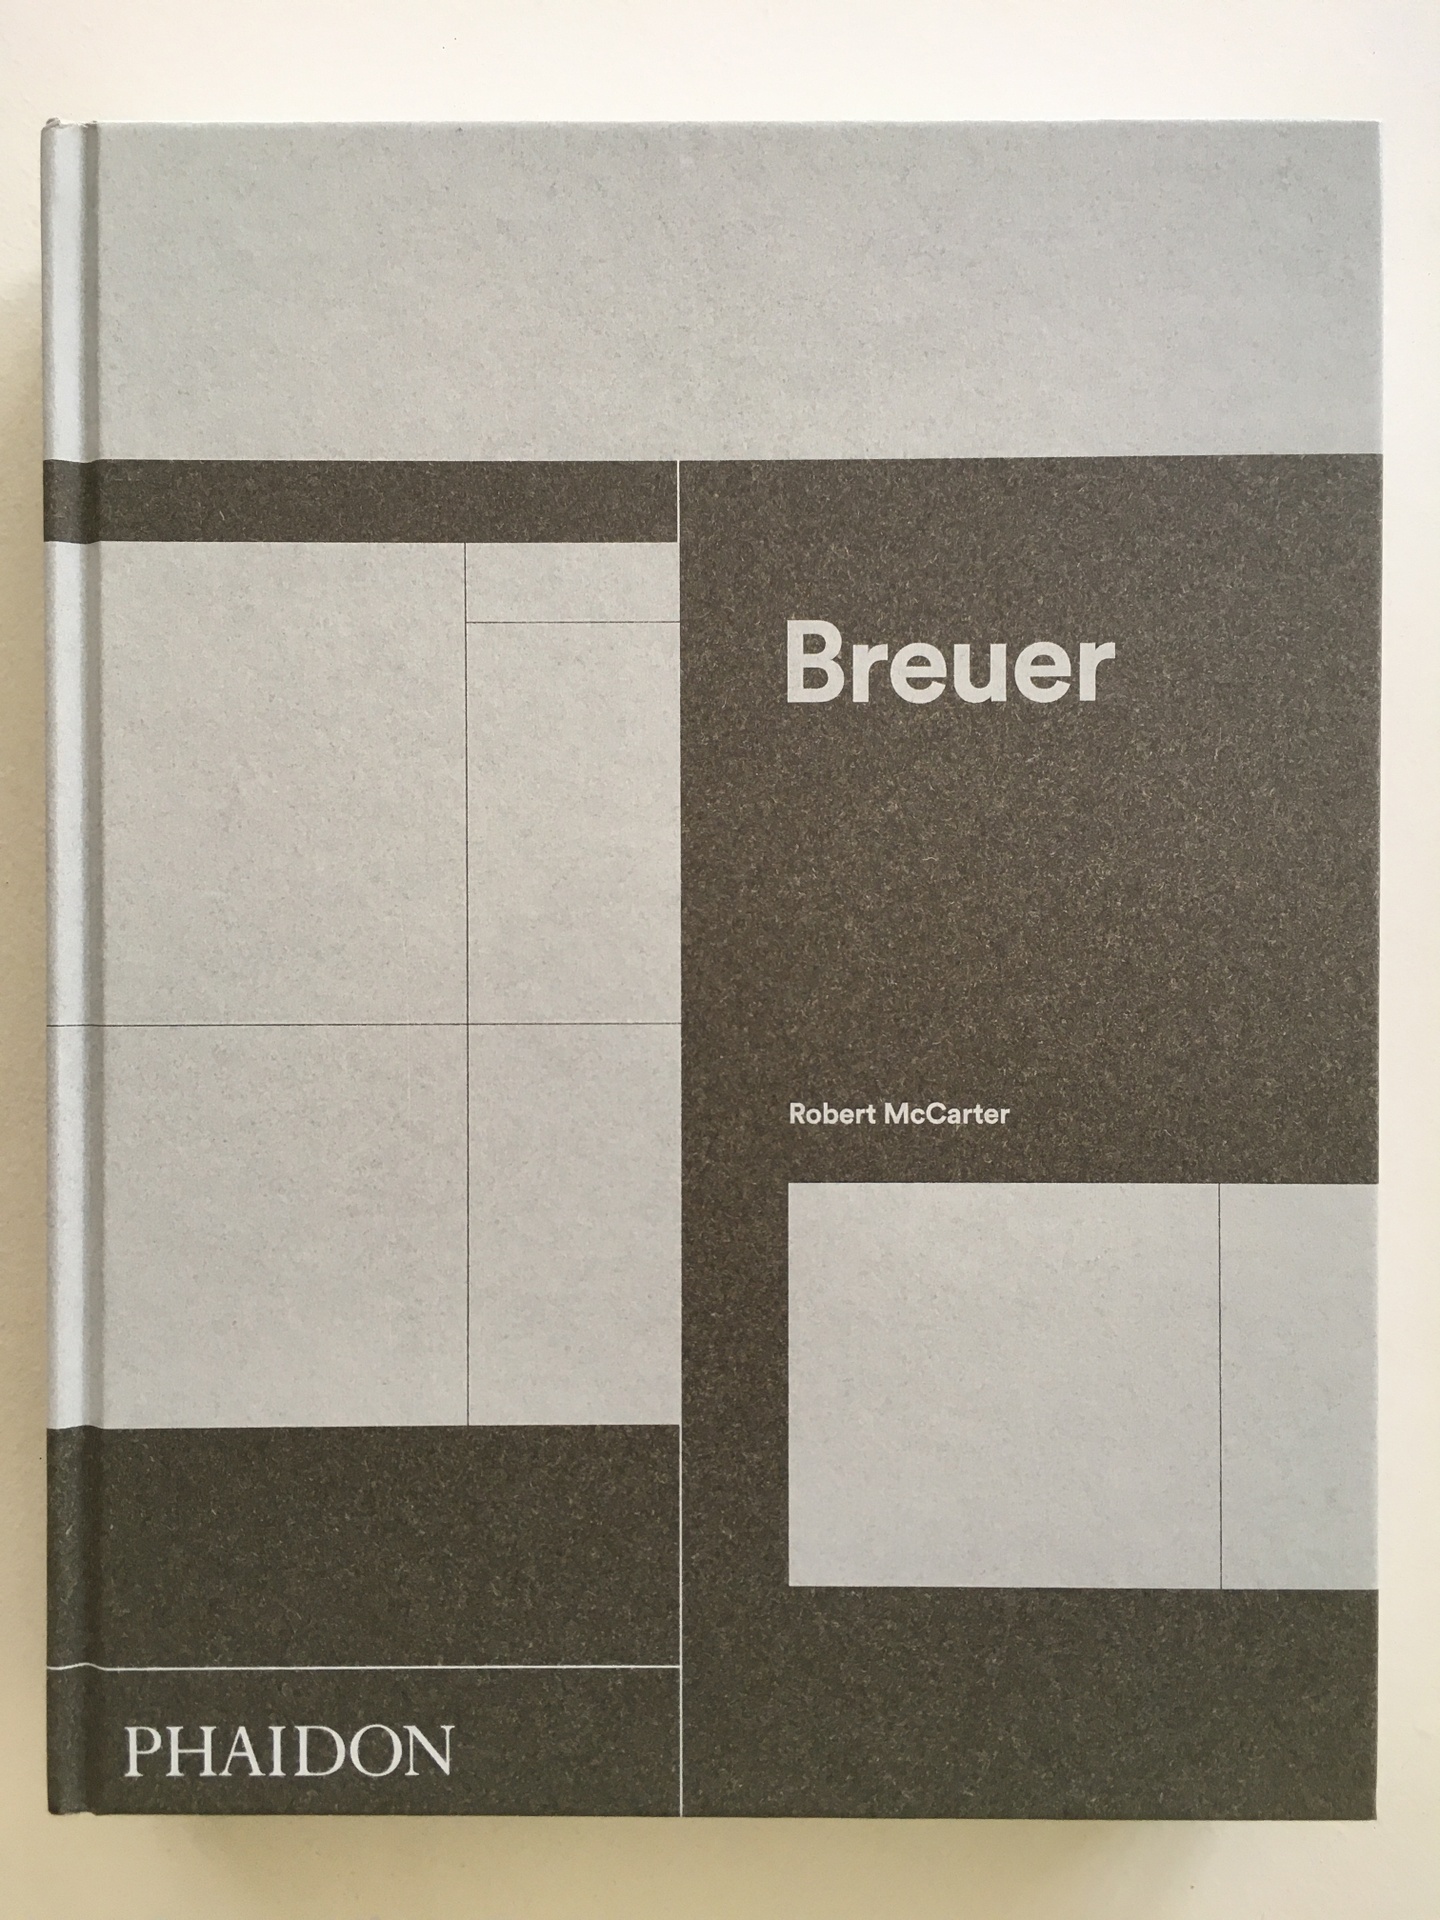 Cover of Marcel Breuer, featuring a couple of subdivided, white rectangles against a brown, granulated background